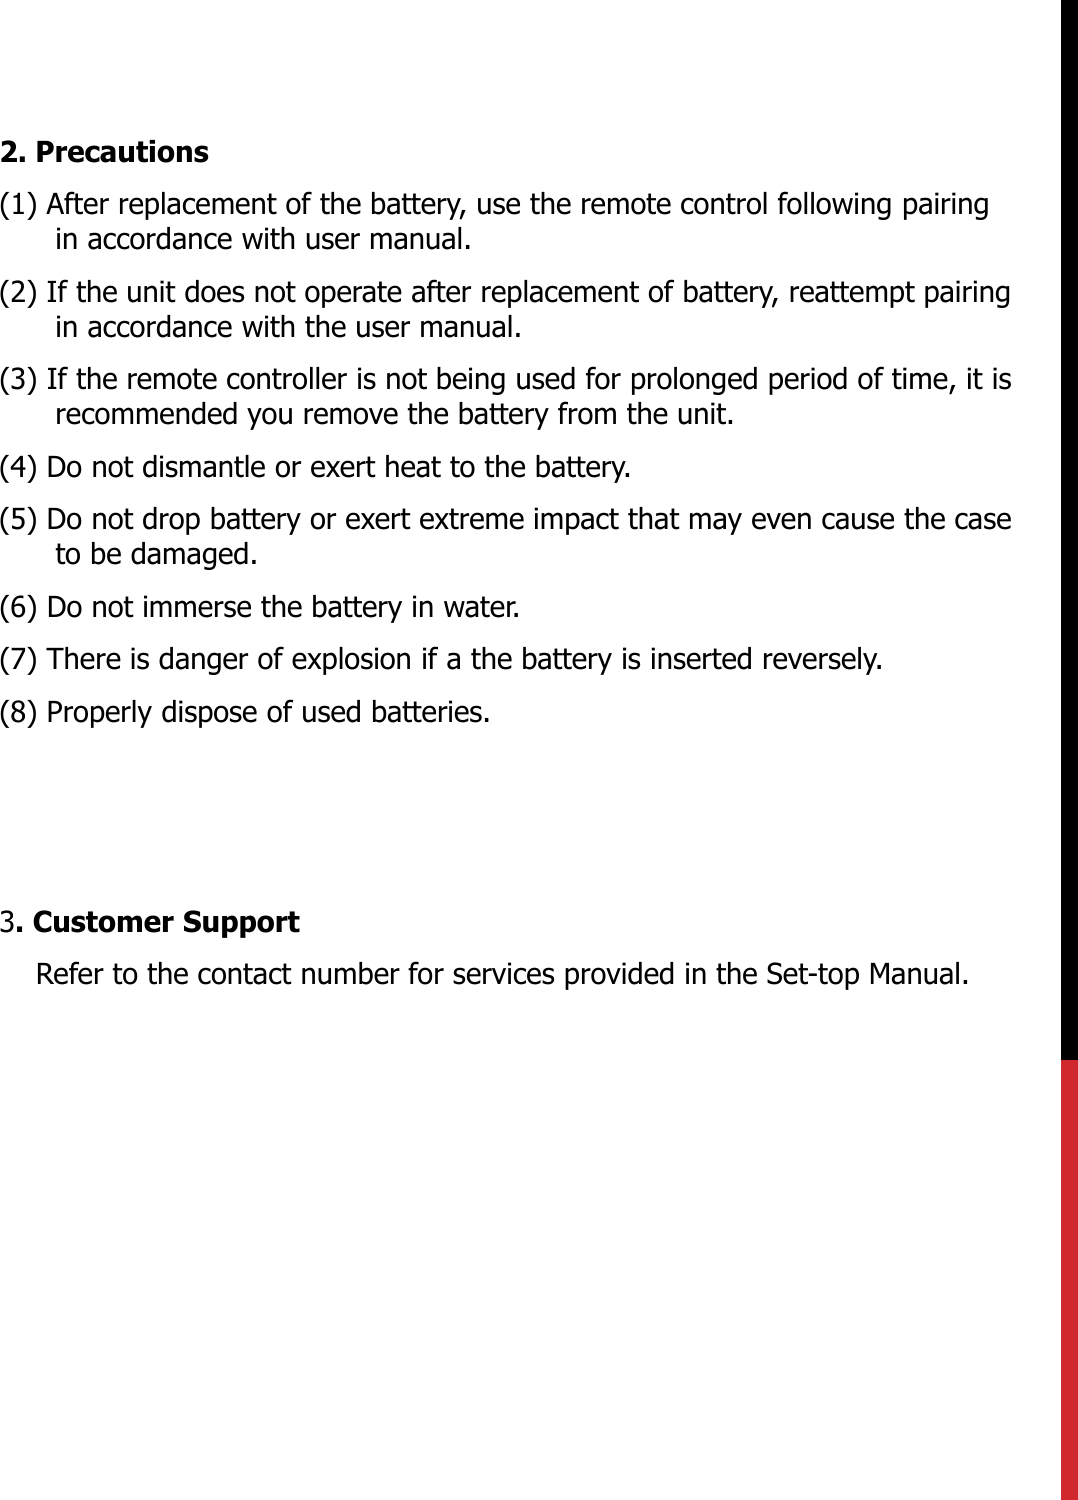 2. Precautions(1) After replacement of the battery, use the remote control following pairing in accordance with user manual.(2) If the unit does not operate after replacement of battery, reattempt pairing in accordance with the user manual.(3) If the remote controller is not being used for prolonged period of time, it is recommended you remove the battery from the unit.  (4) Do not dismantle or exert heat to the battery.(5) Do not drop battery or exert extreme impact that may even cause the case to be damaged. (6) Do not immerse the battery in water.(7) There is danger of explosion if a the battery is inserted reversely.(8) Properly dispose of used batteries.3. Customer SupportRefer to the contact number for services provided in the Set-top Manual.   